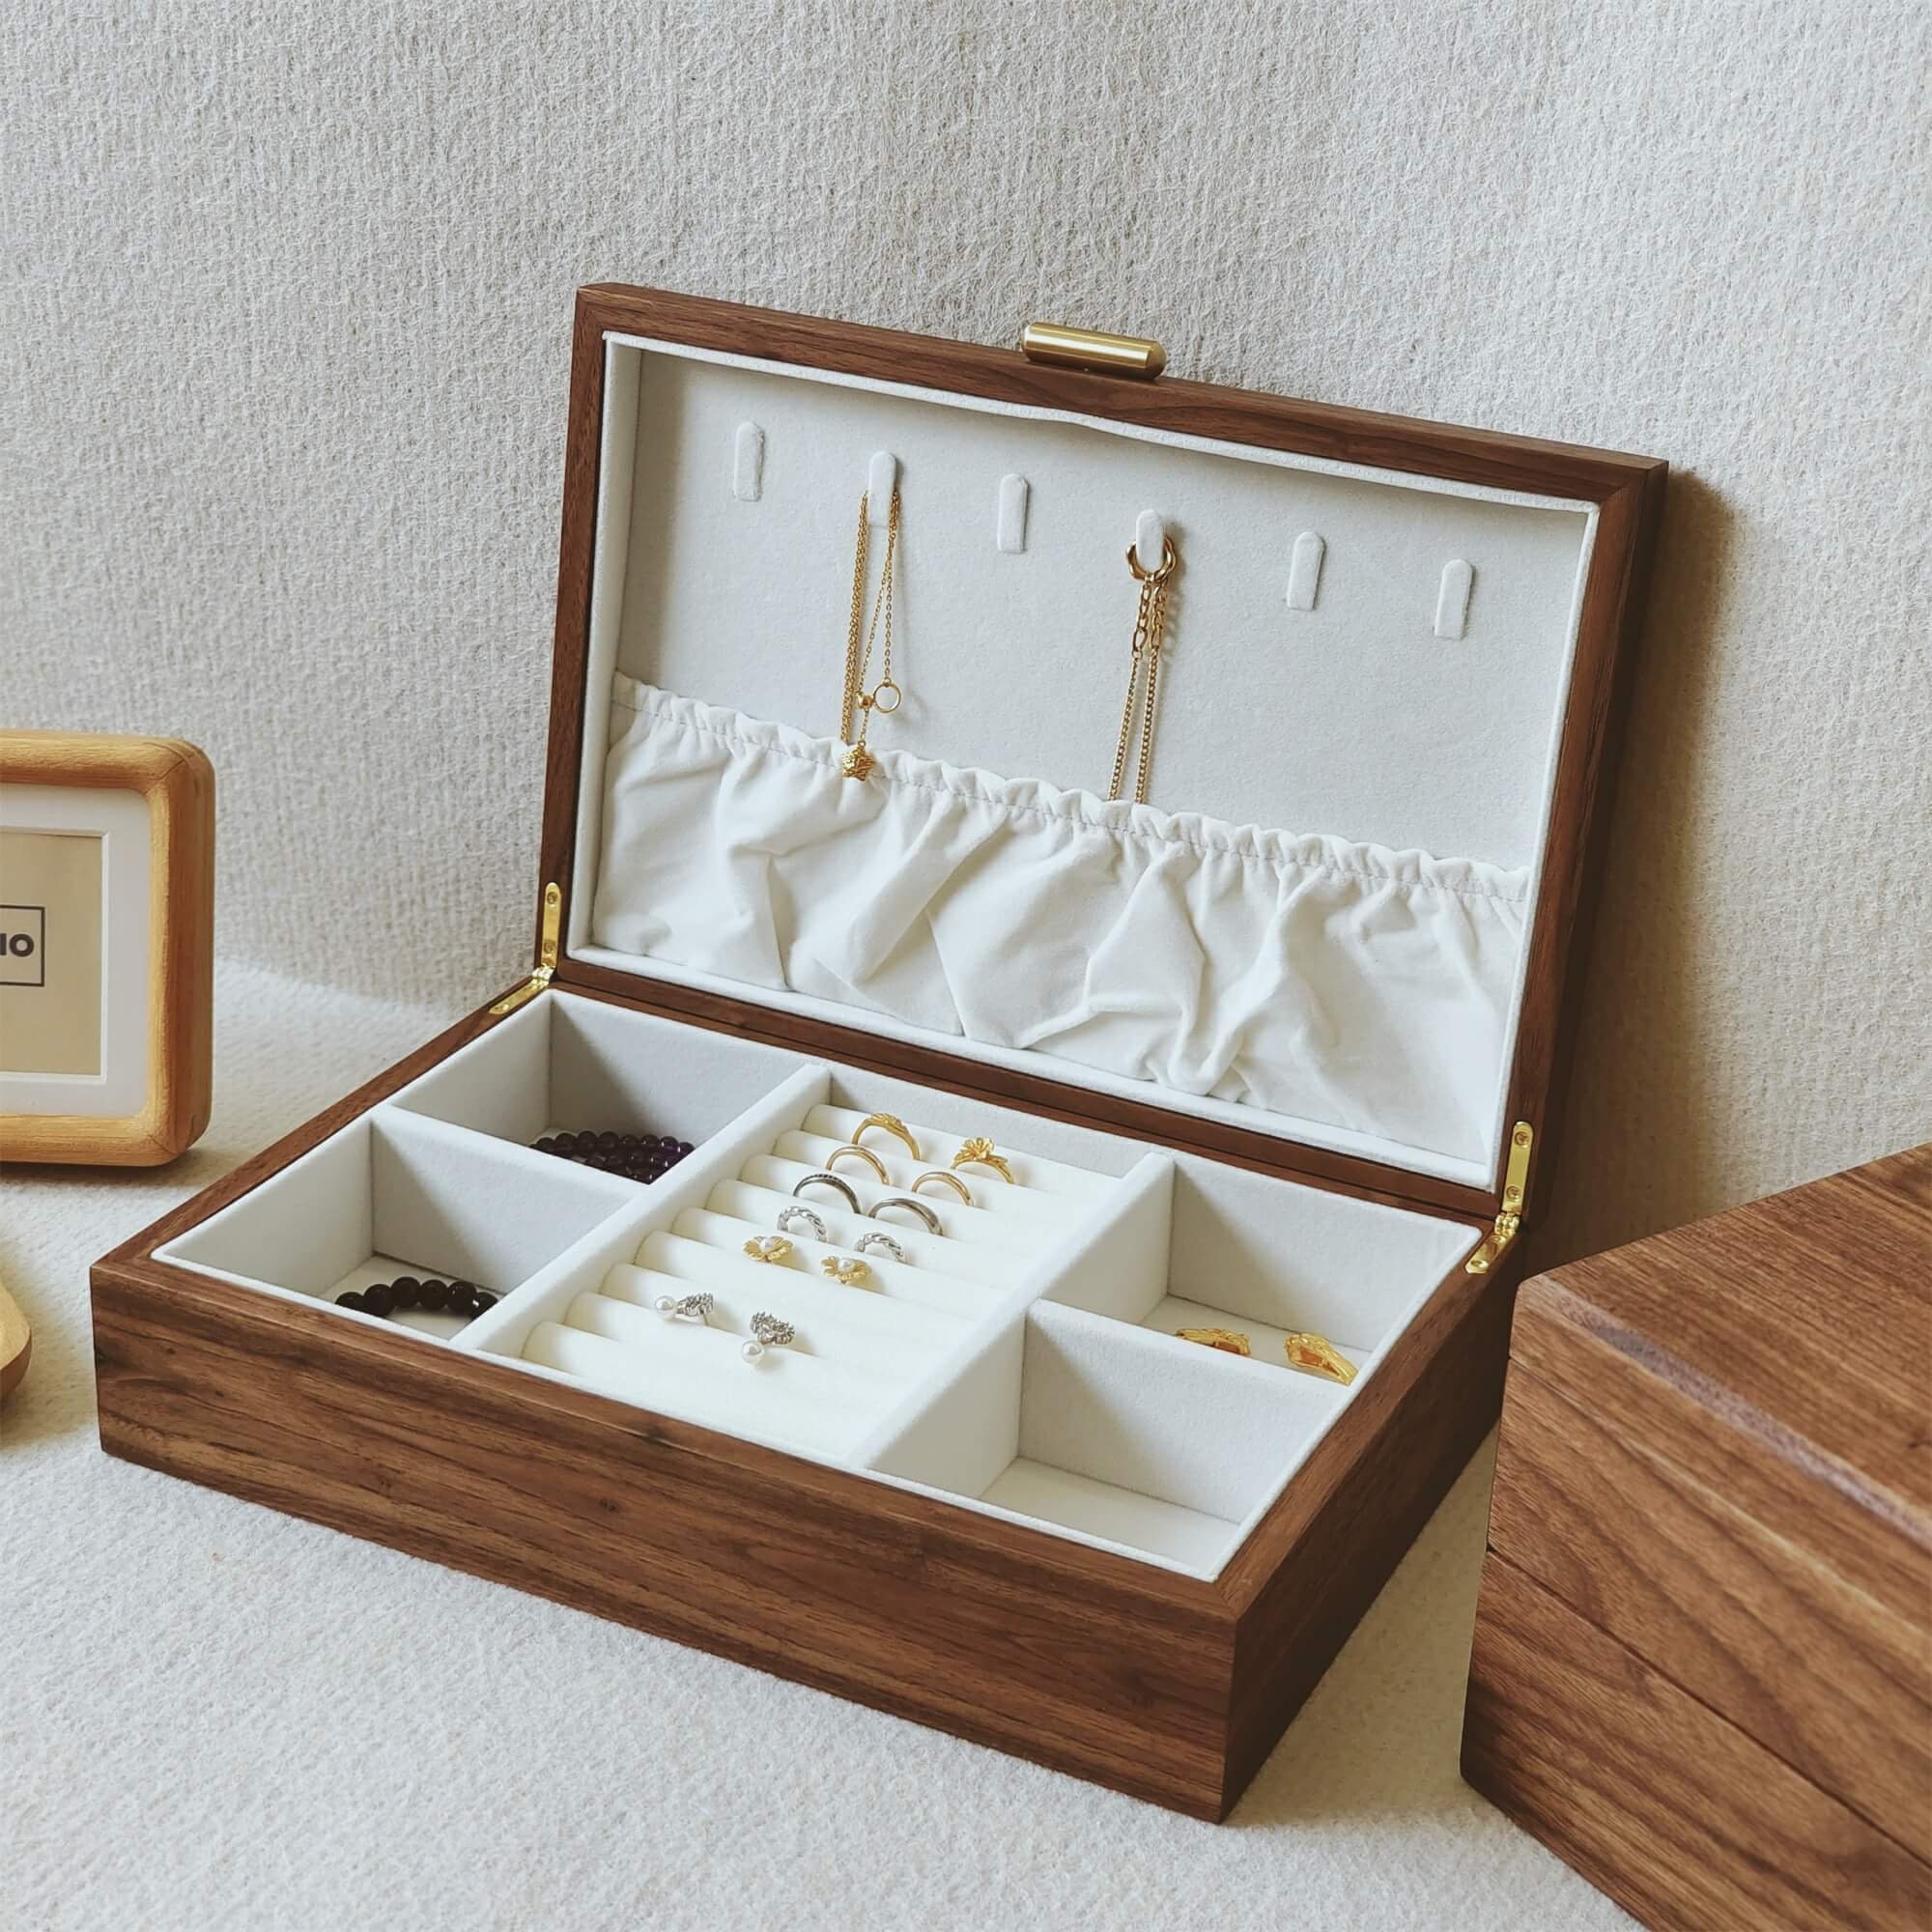 Solid Wood Jewelry Box Small Walnut Wood Cherry Wood Jewelry Case Earring  Bracelet Necklace Rings Organizer, Travel Storage Box - China Wooden Box  and Wooden Box Gift Ideas price